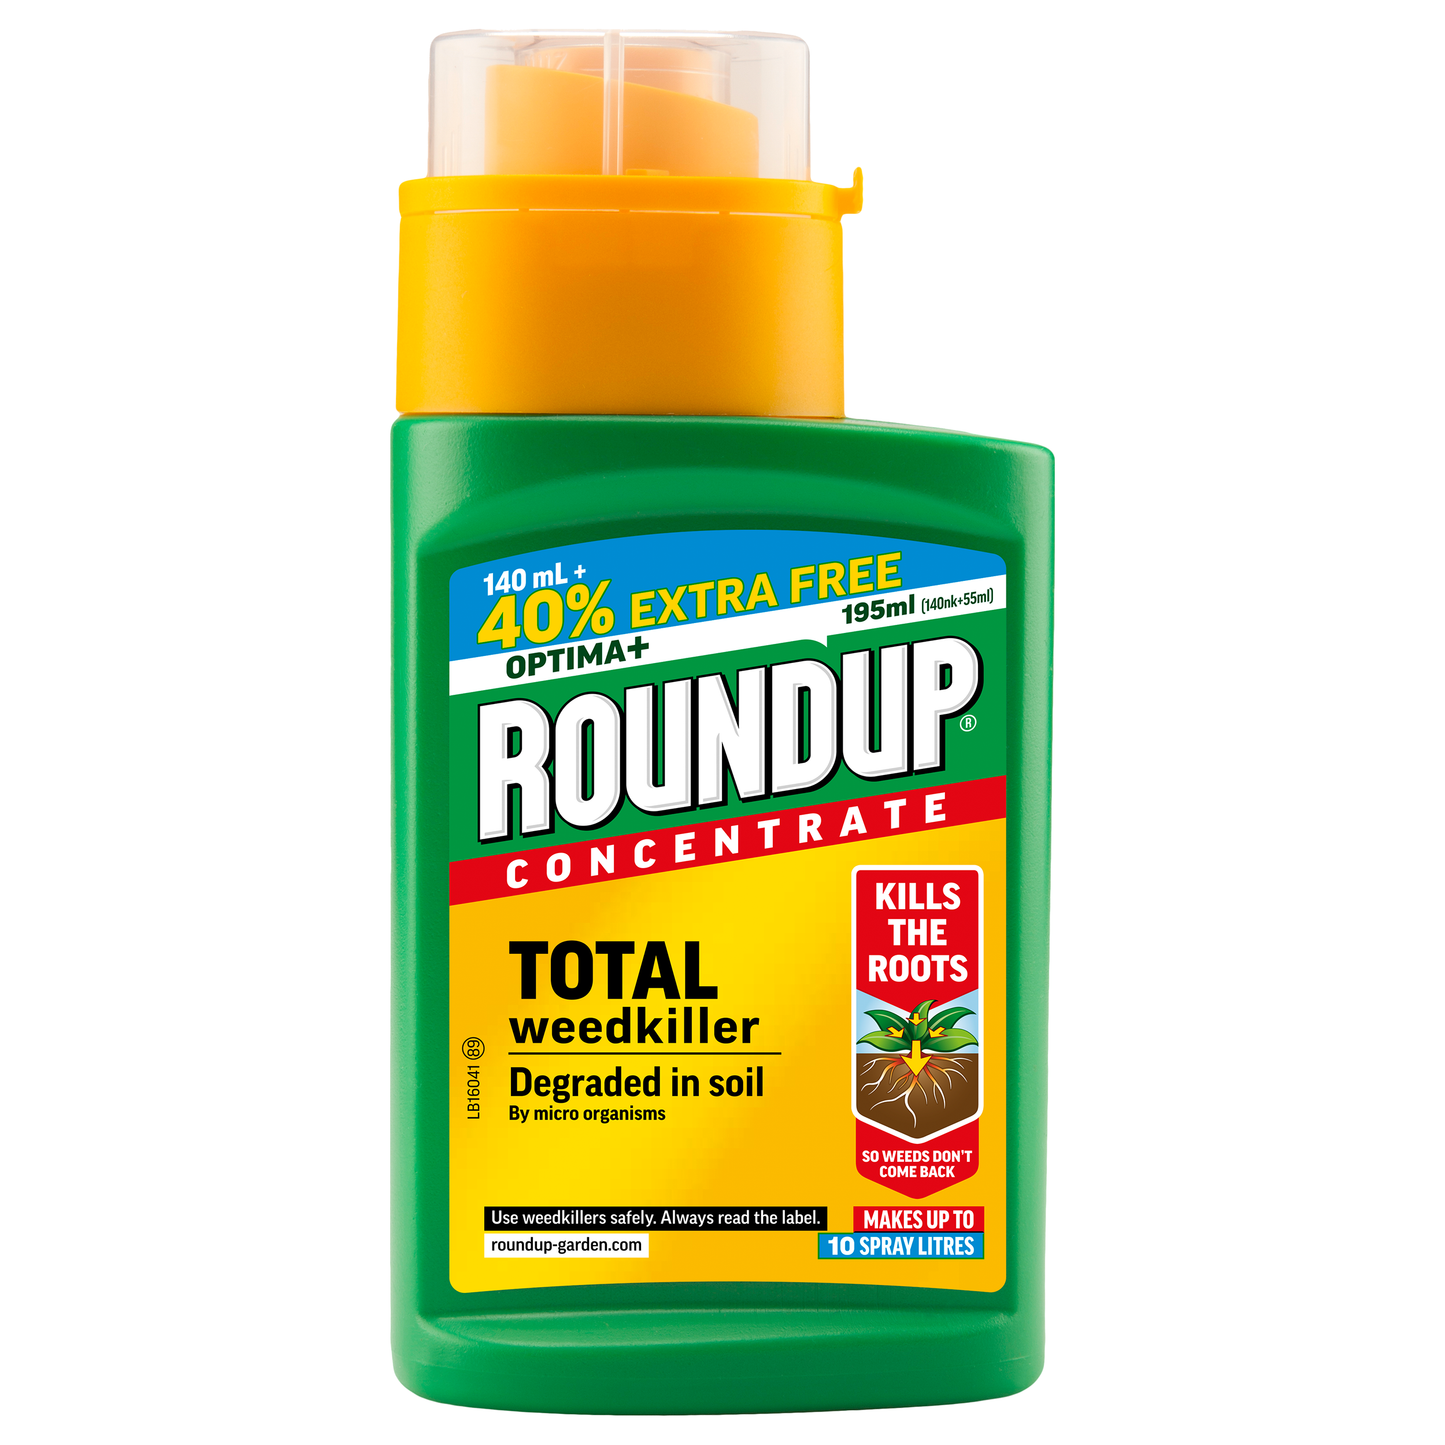 Roundup Optima+ Weedkiller Concentrate 140ml + 40% Free